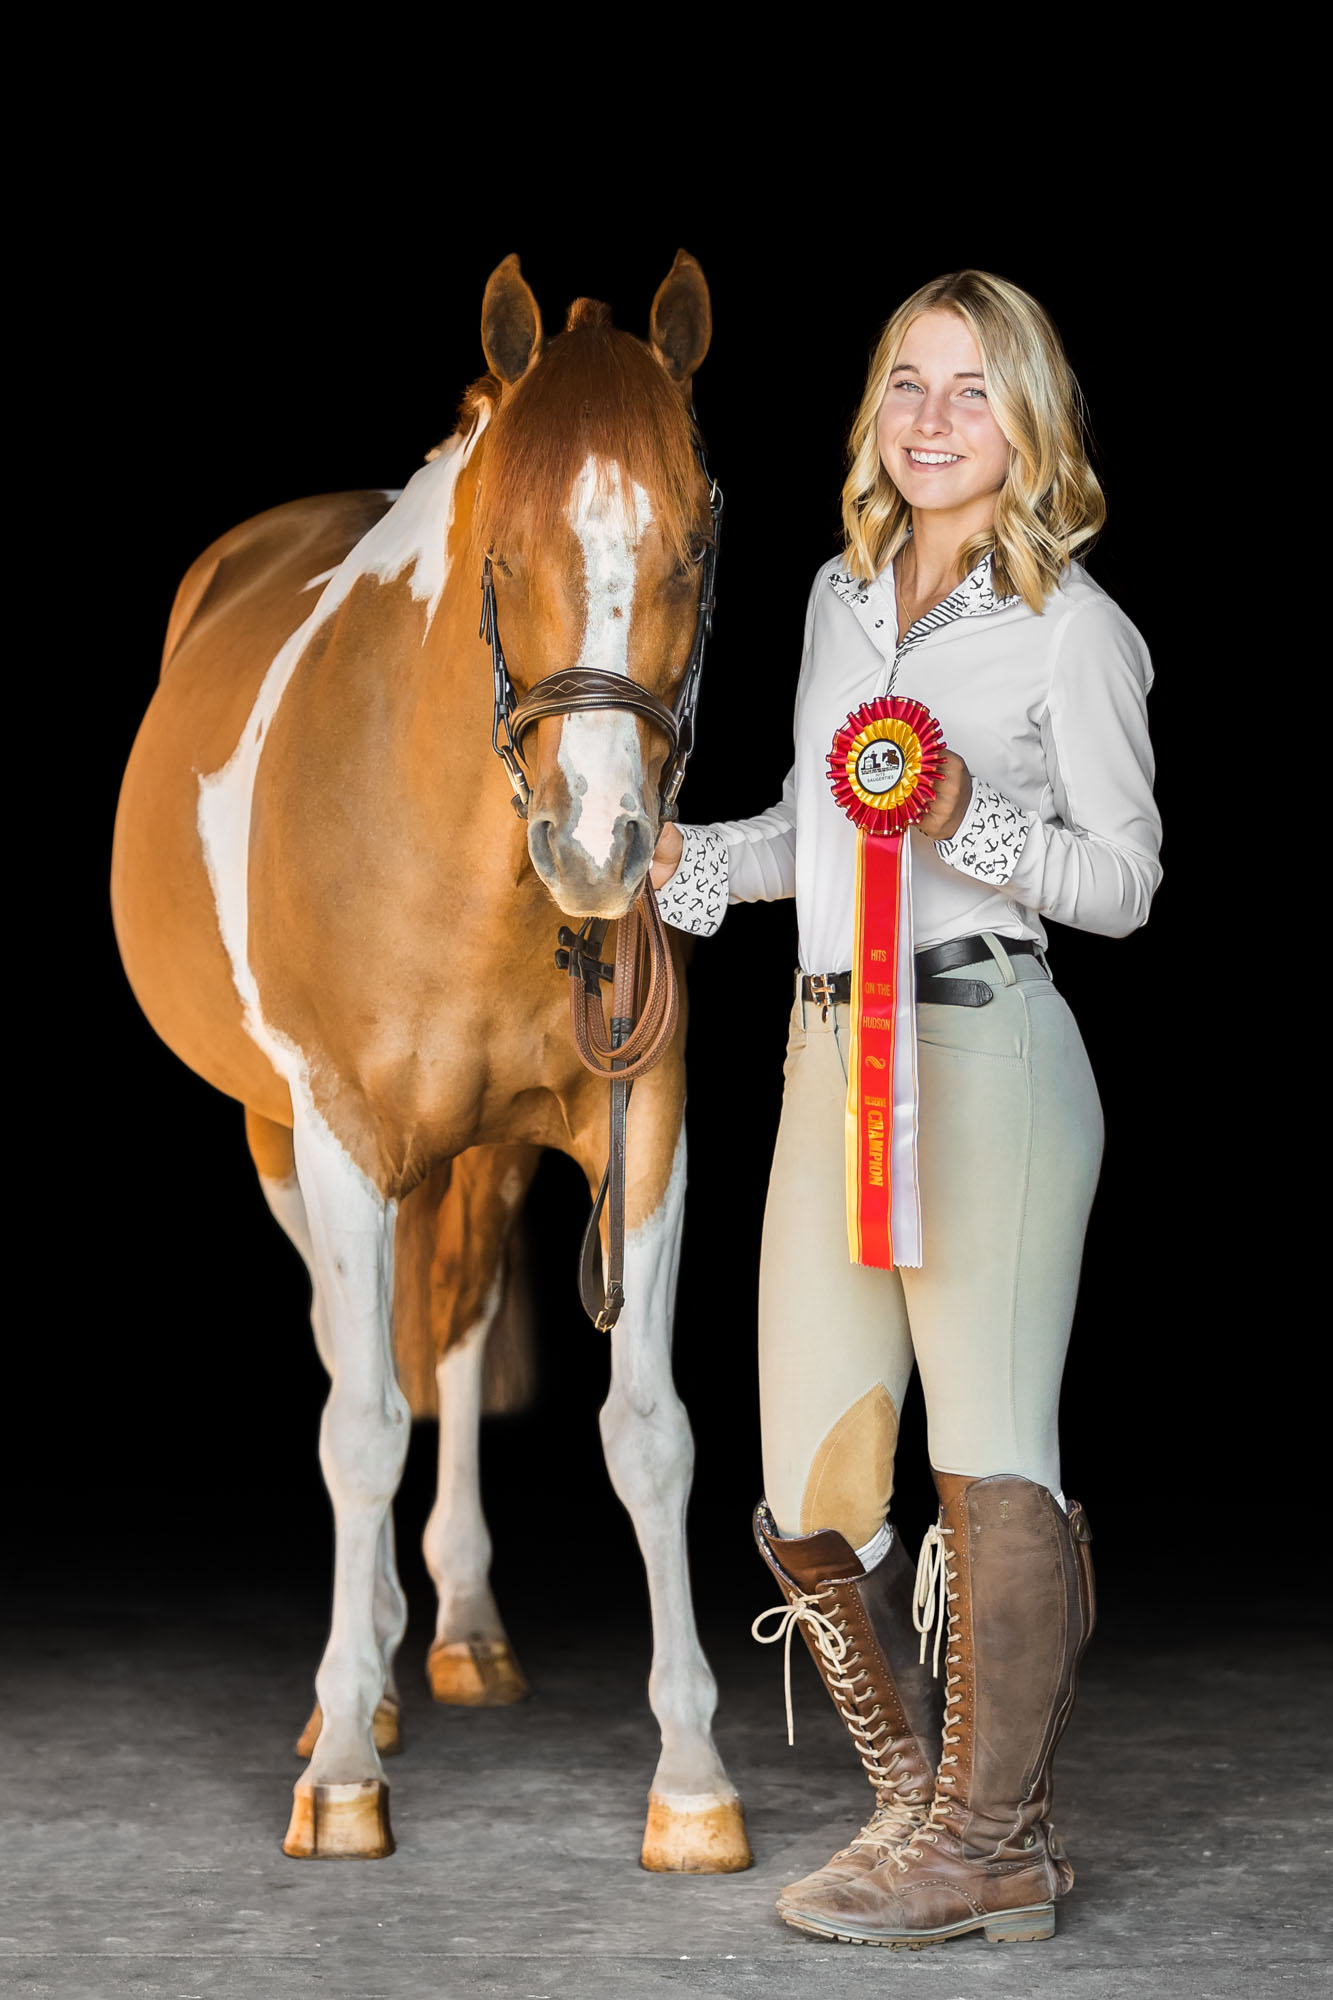 Cappy and Mallory together with one of their ribbons